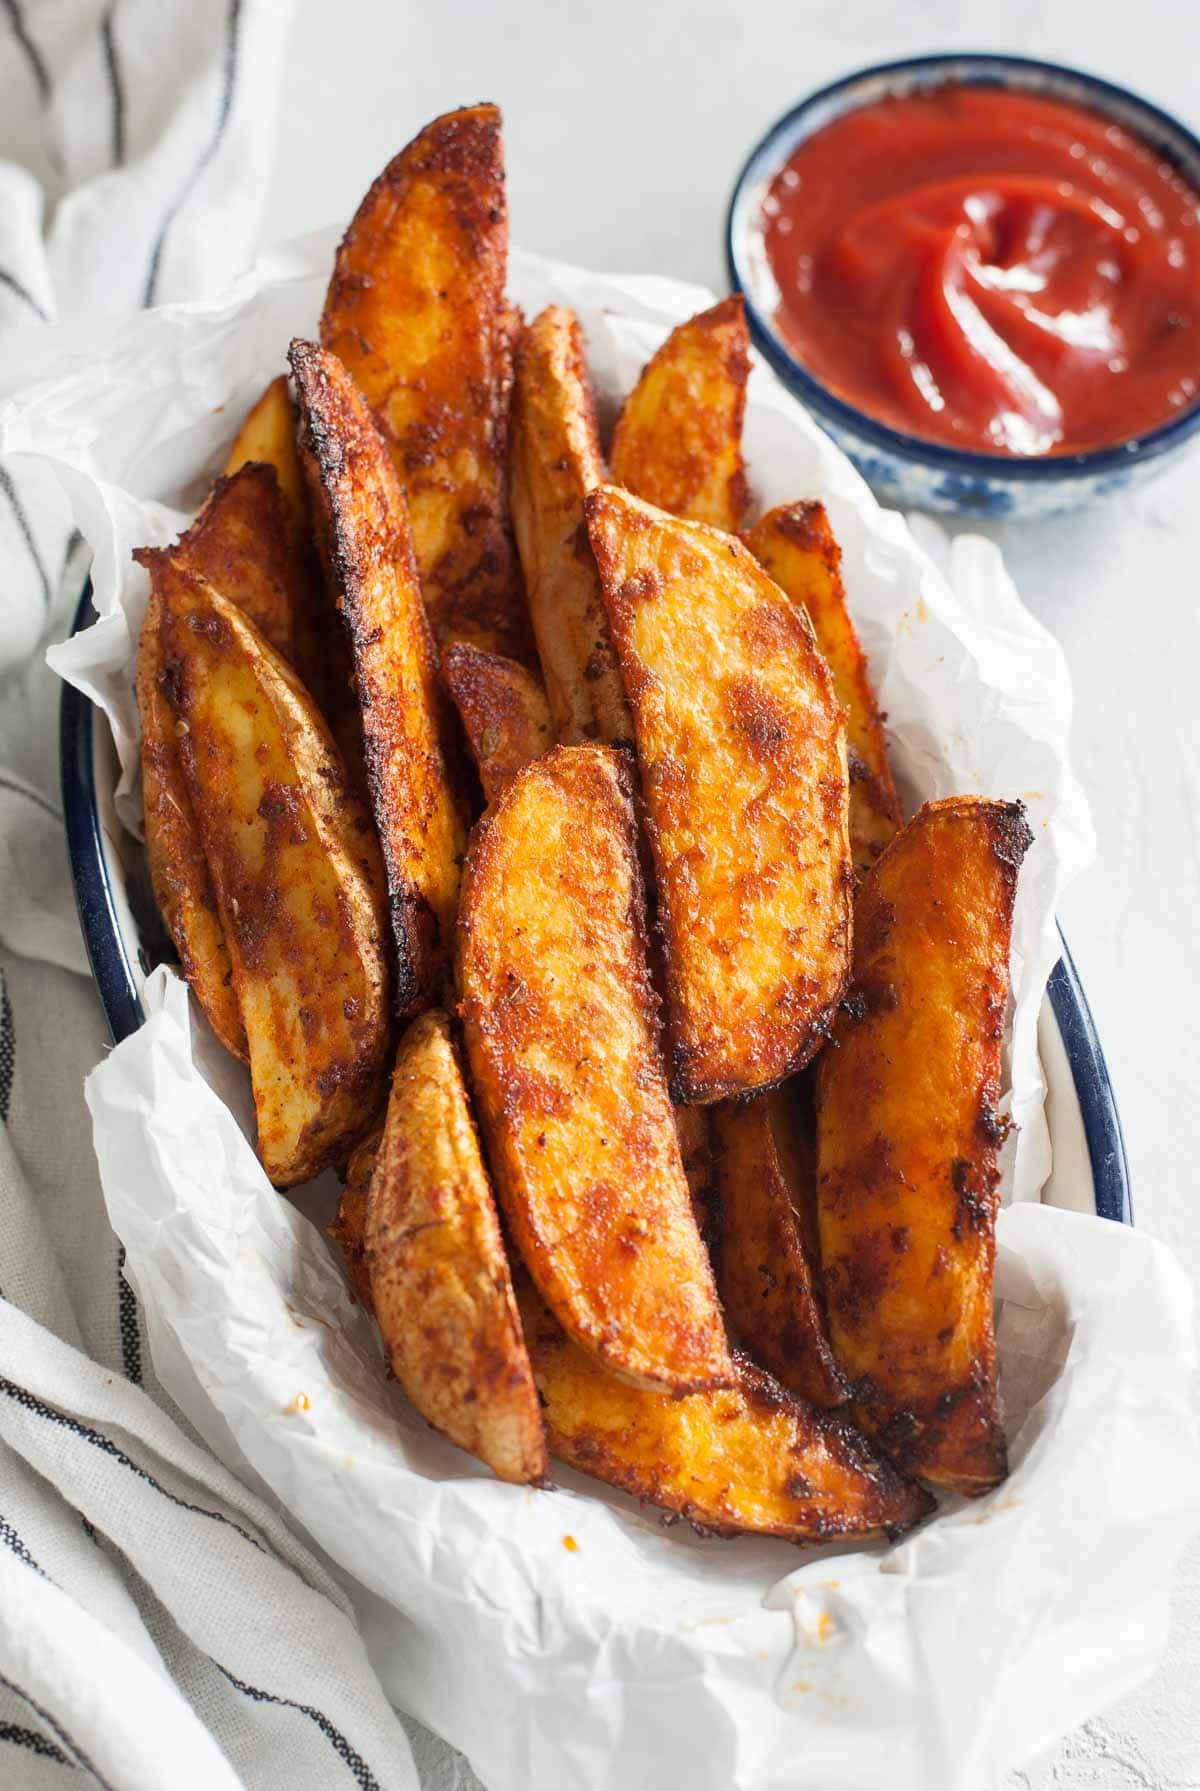 Roasted potato wedges on a piece of parchment paper in bowl on towel.